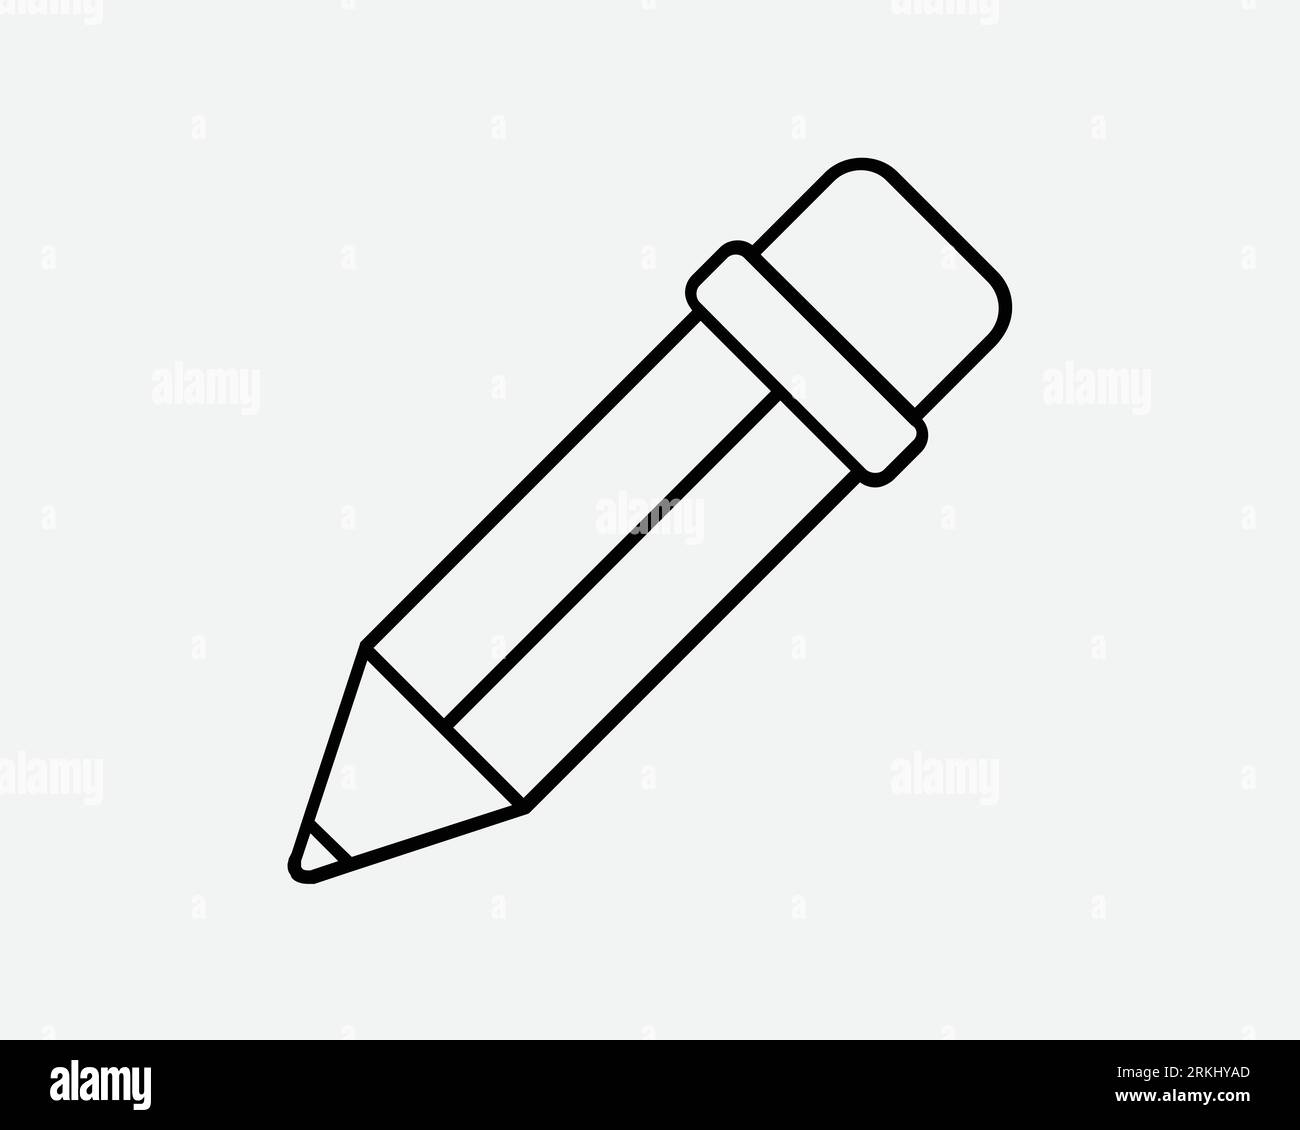 Pencil Edit Line Icon Pen Stationery Office Study Write Draw Black White Thin Outline Shape Vector Clipart Graphic Illustration Artwork Sign Symbol Stock Vector